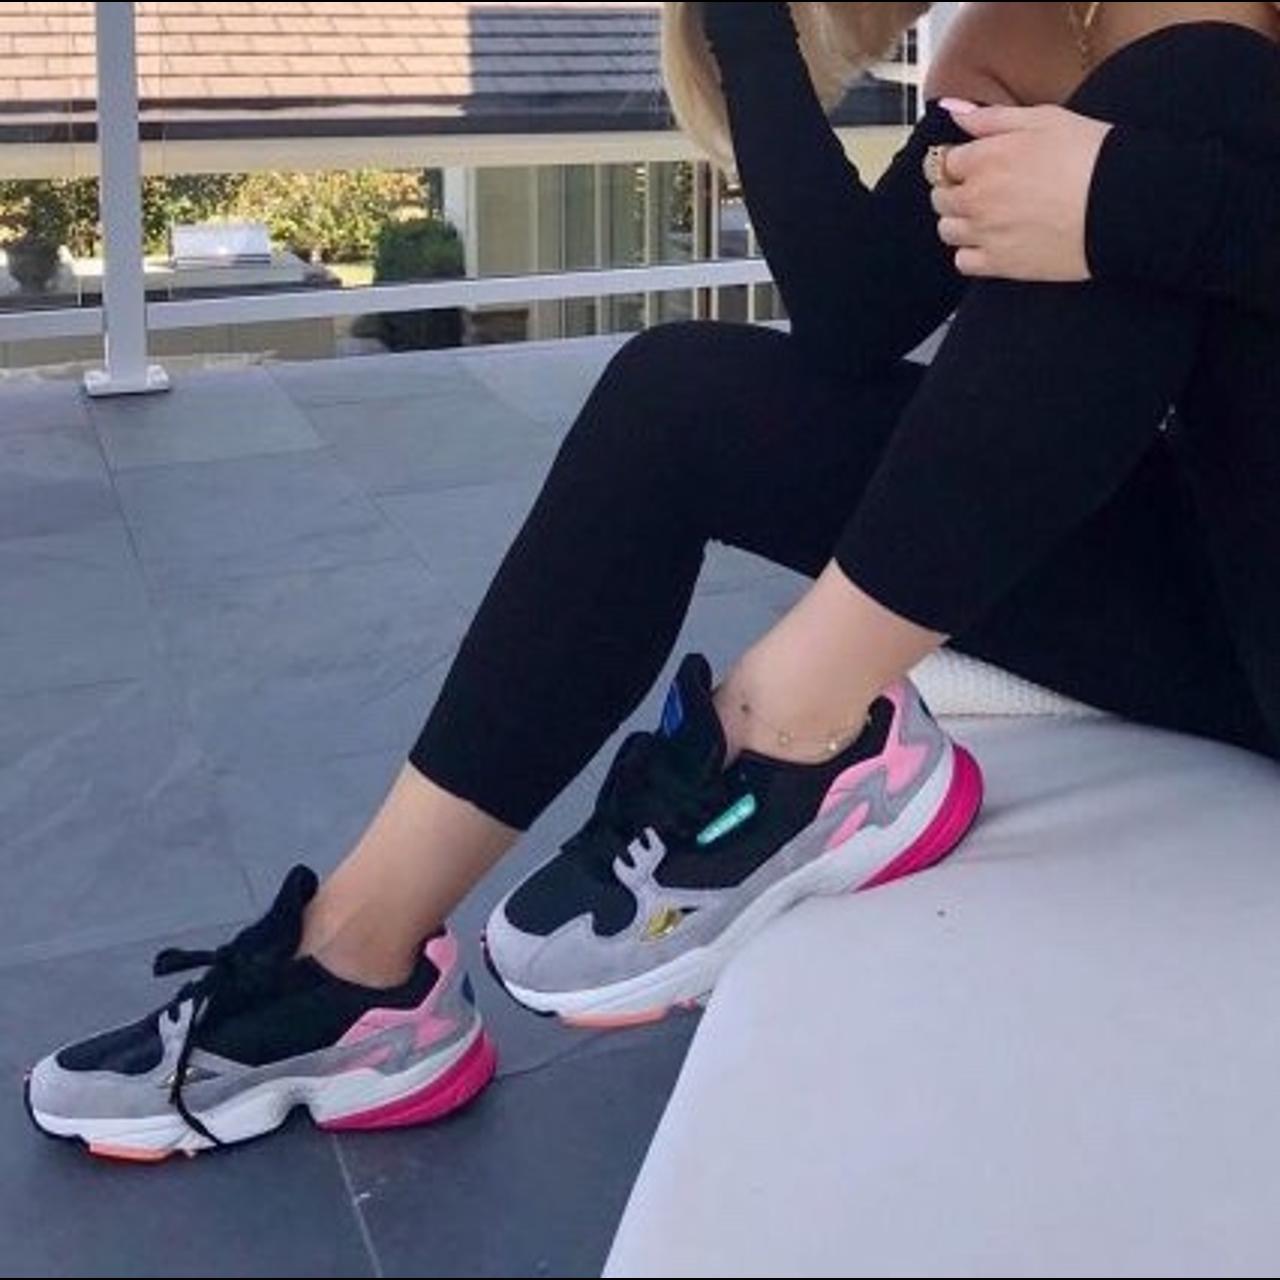 Where to Buy Kylie Jenner's Adidas Falcon Trainers UK